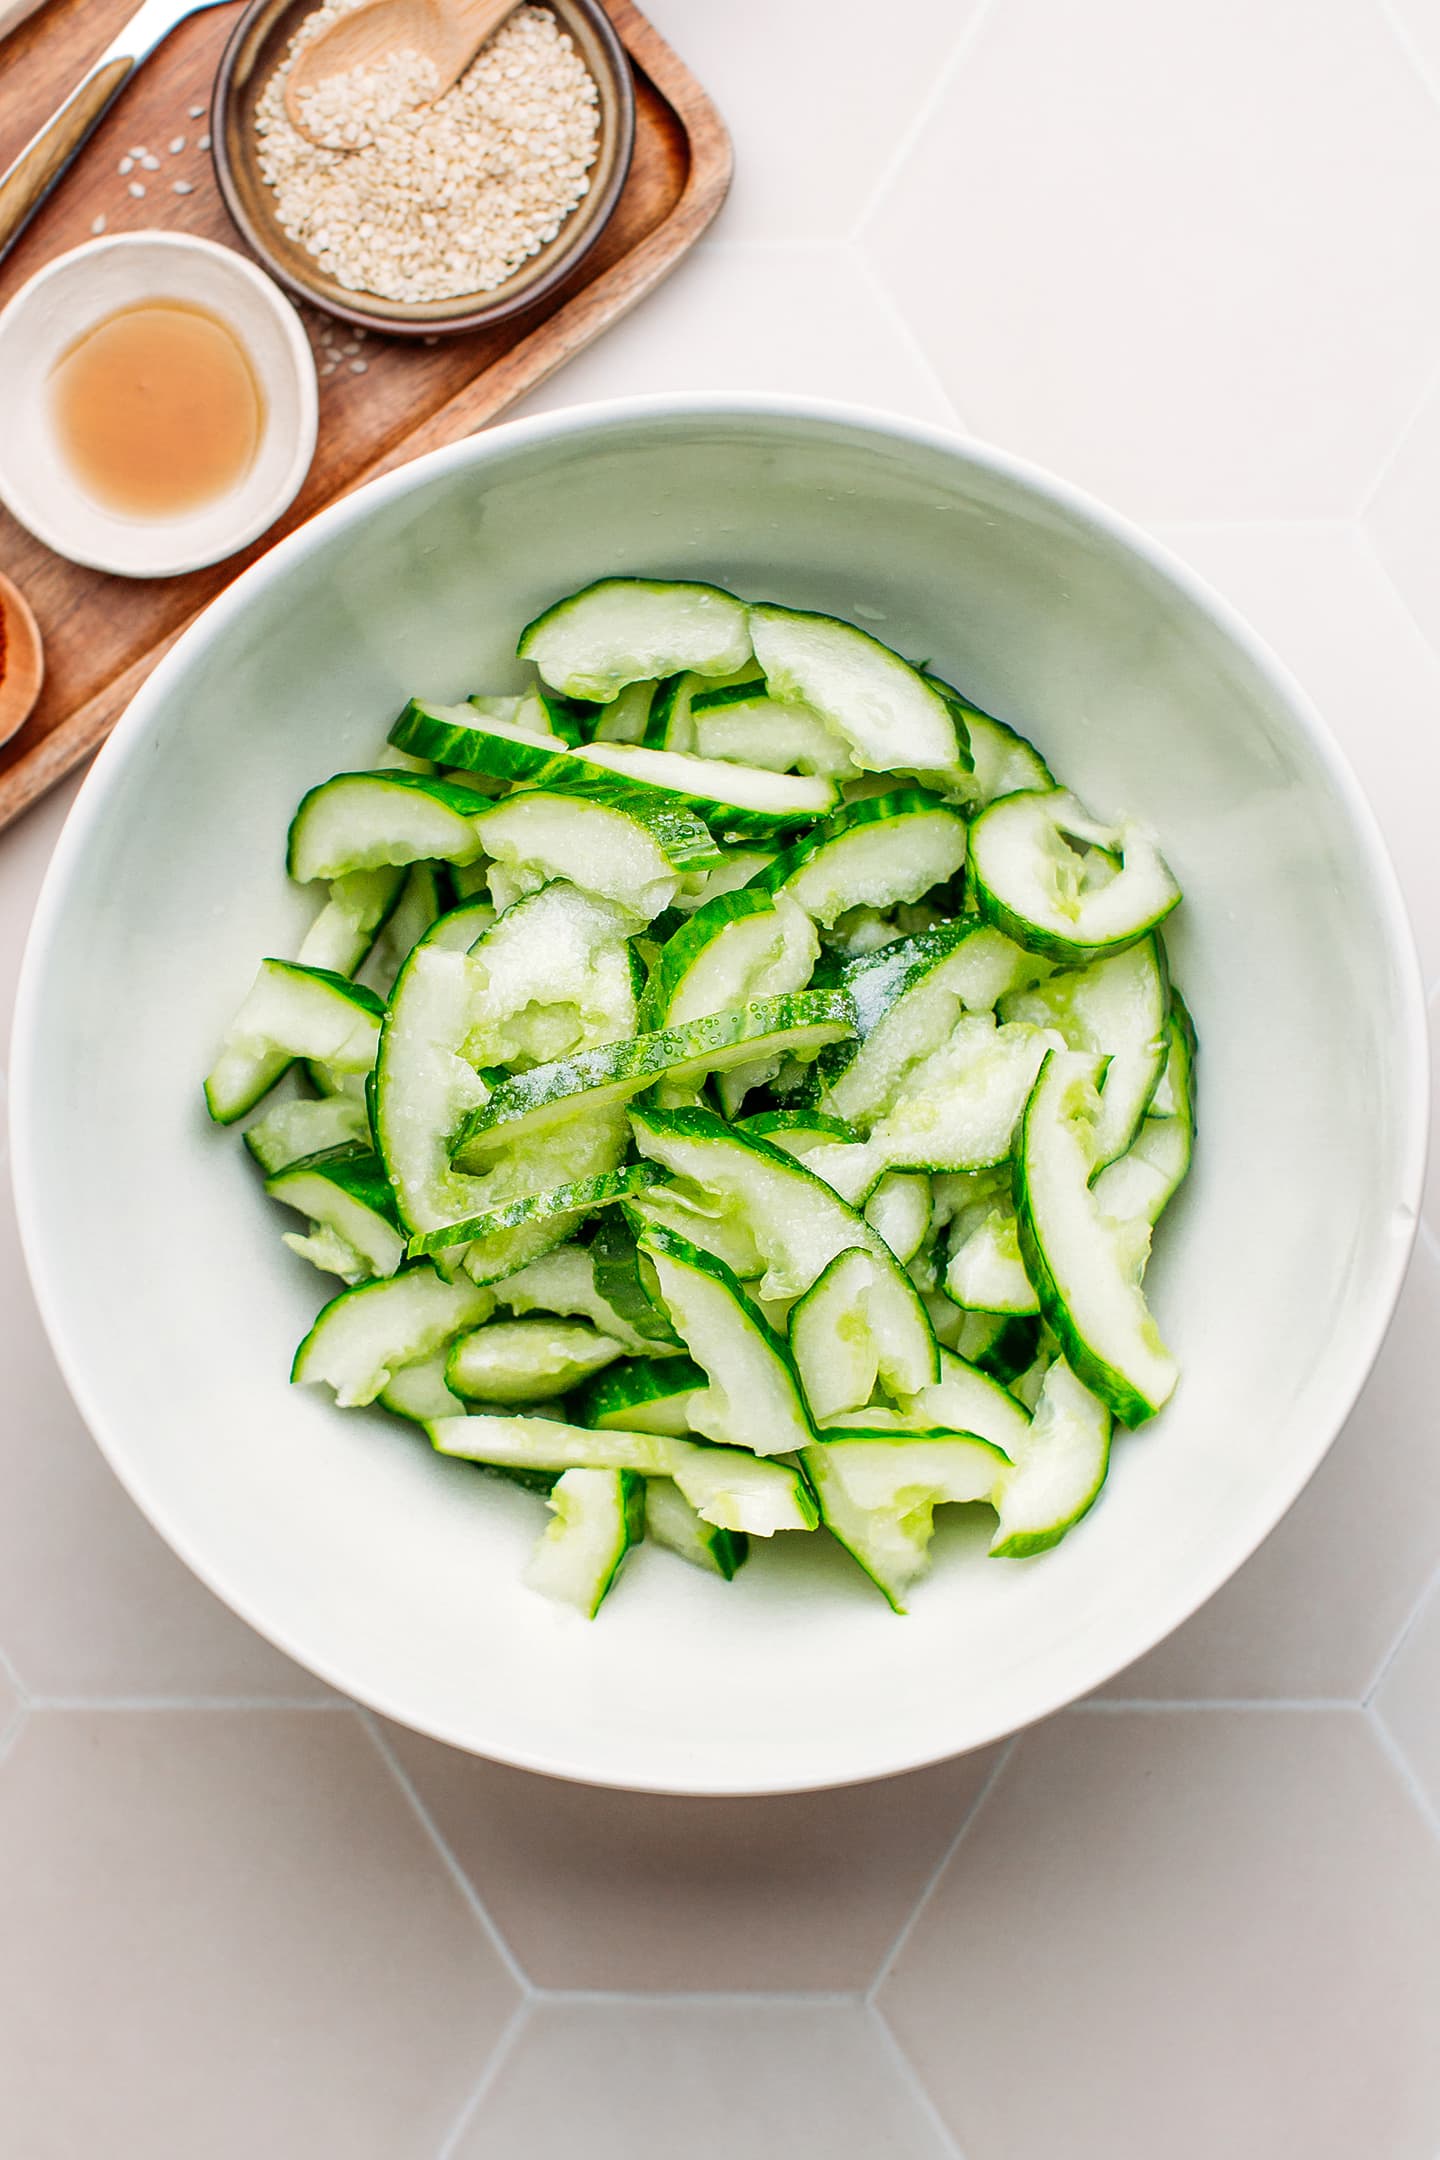 Smashed cucumbers and salt in a mixing bowl.